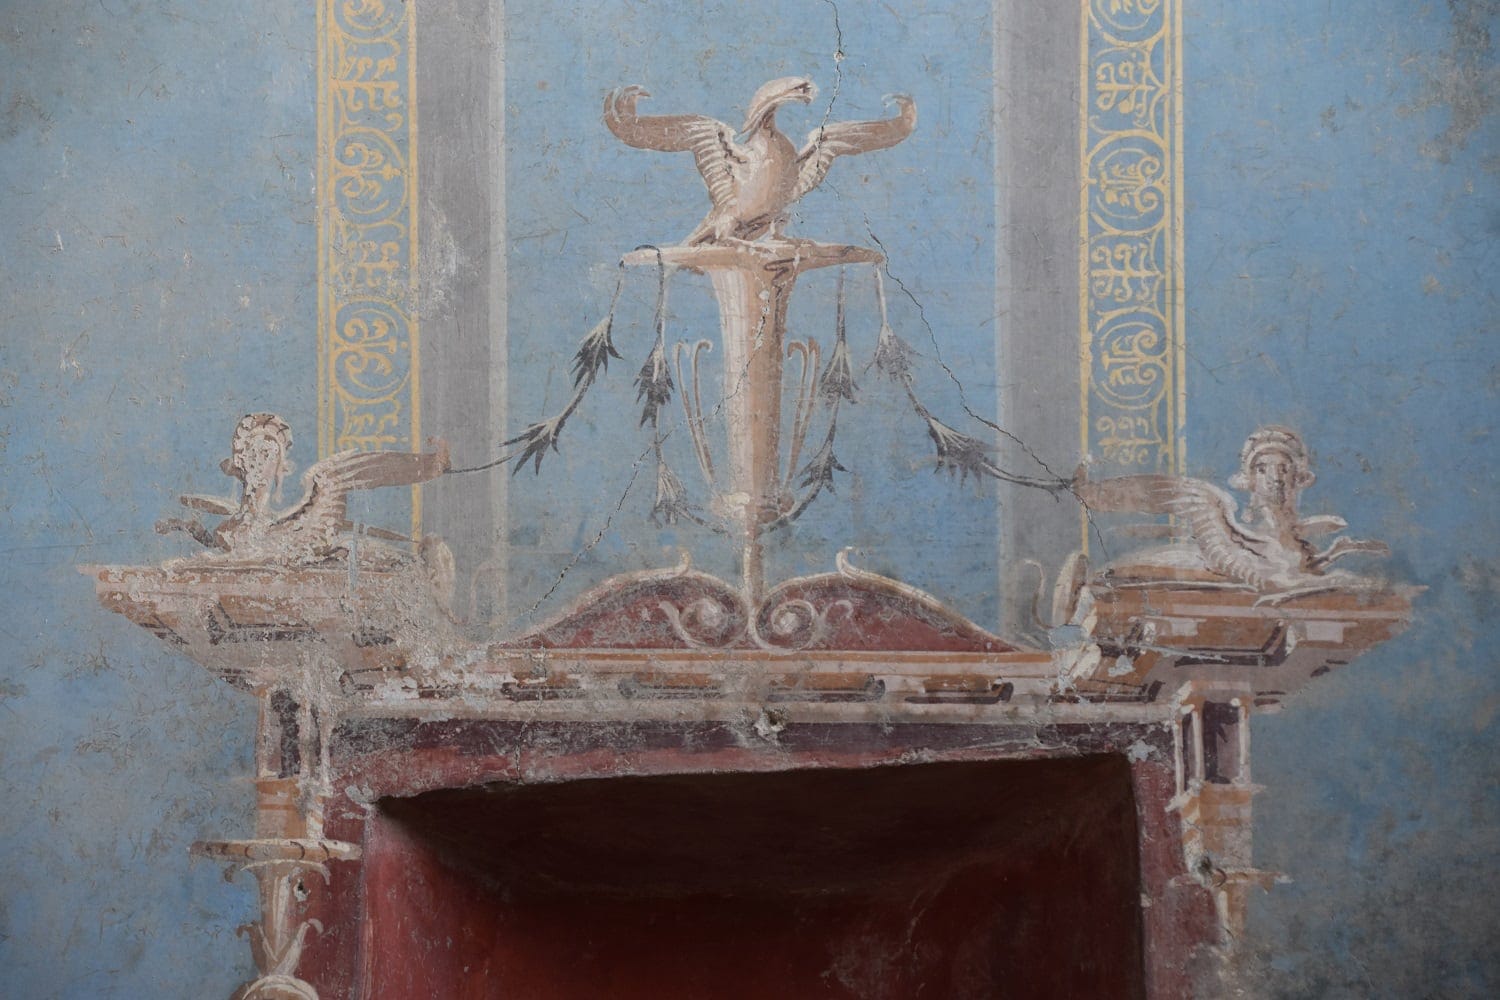 ornate architectural details are painted in a blue fresco surrounding a red niche